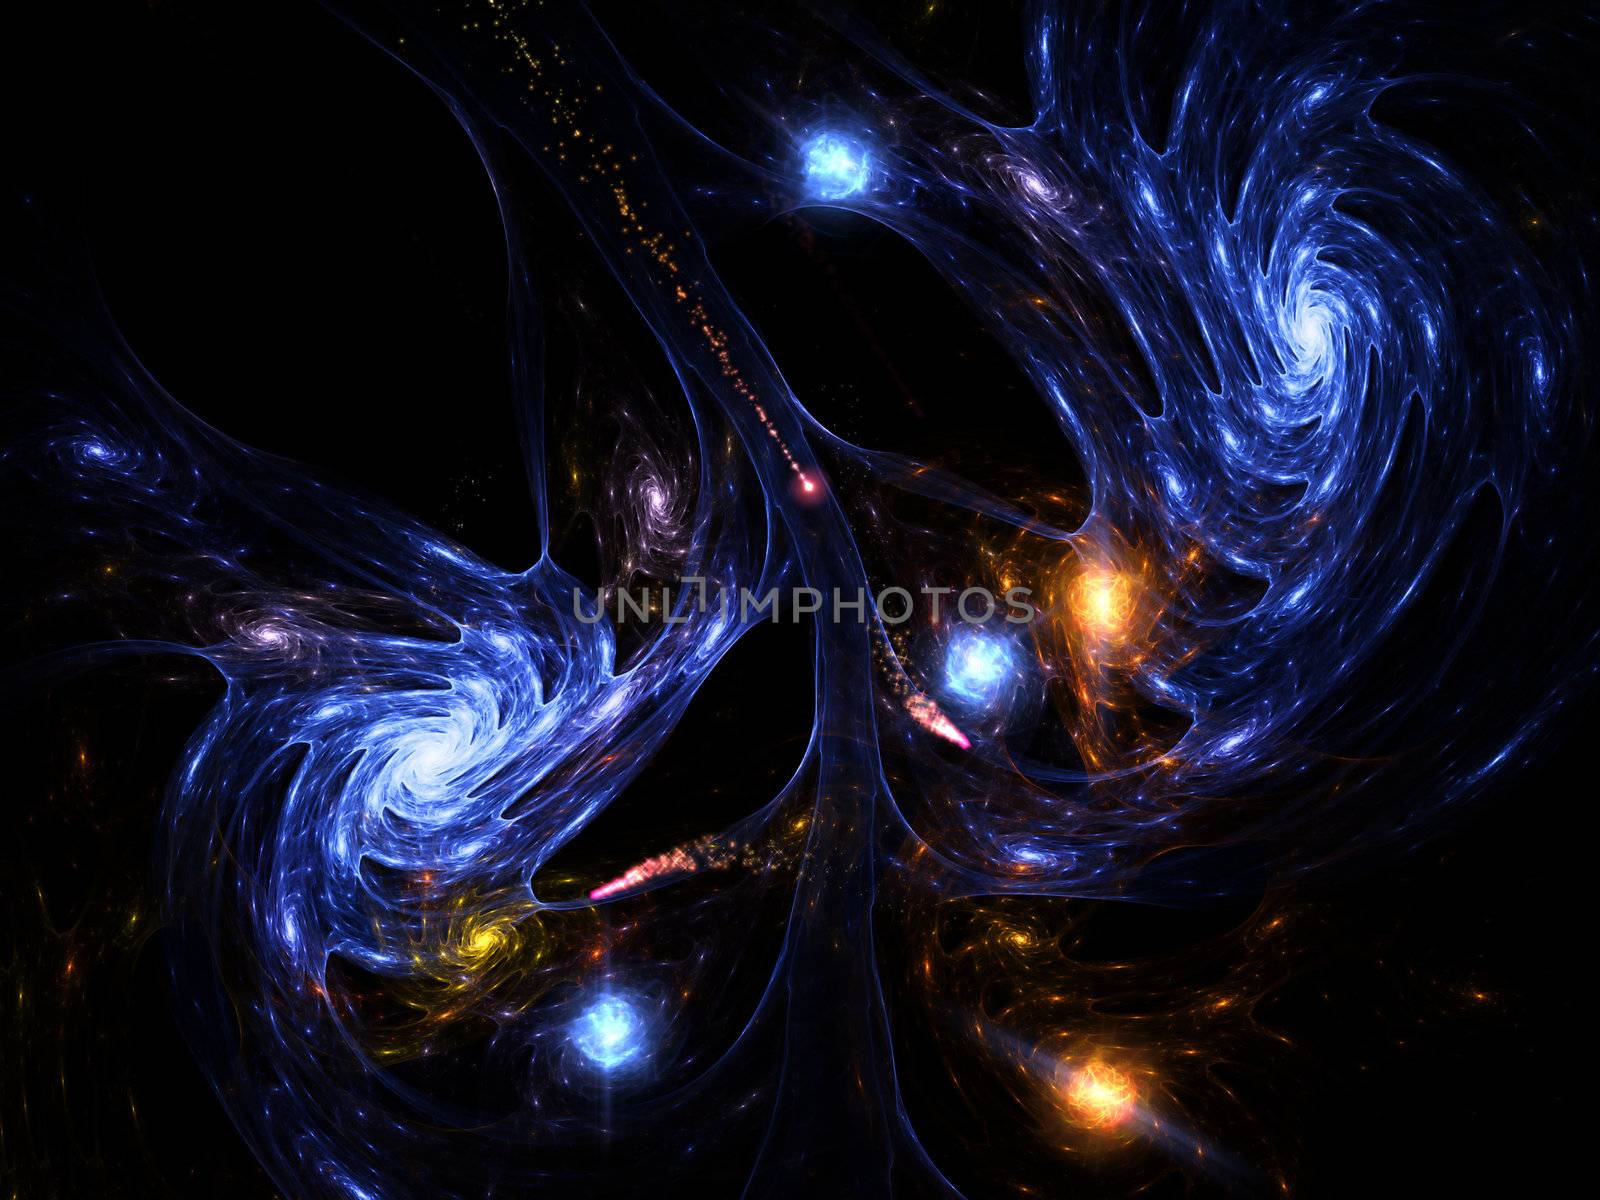 Interplay of abstract forms and lights on the subject of cosmology, astronomy, modern science and technology